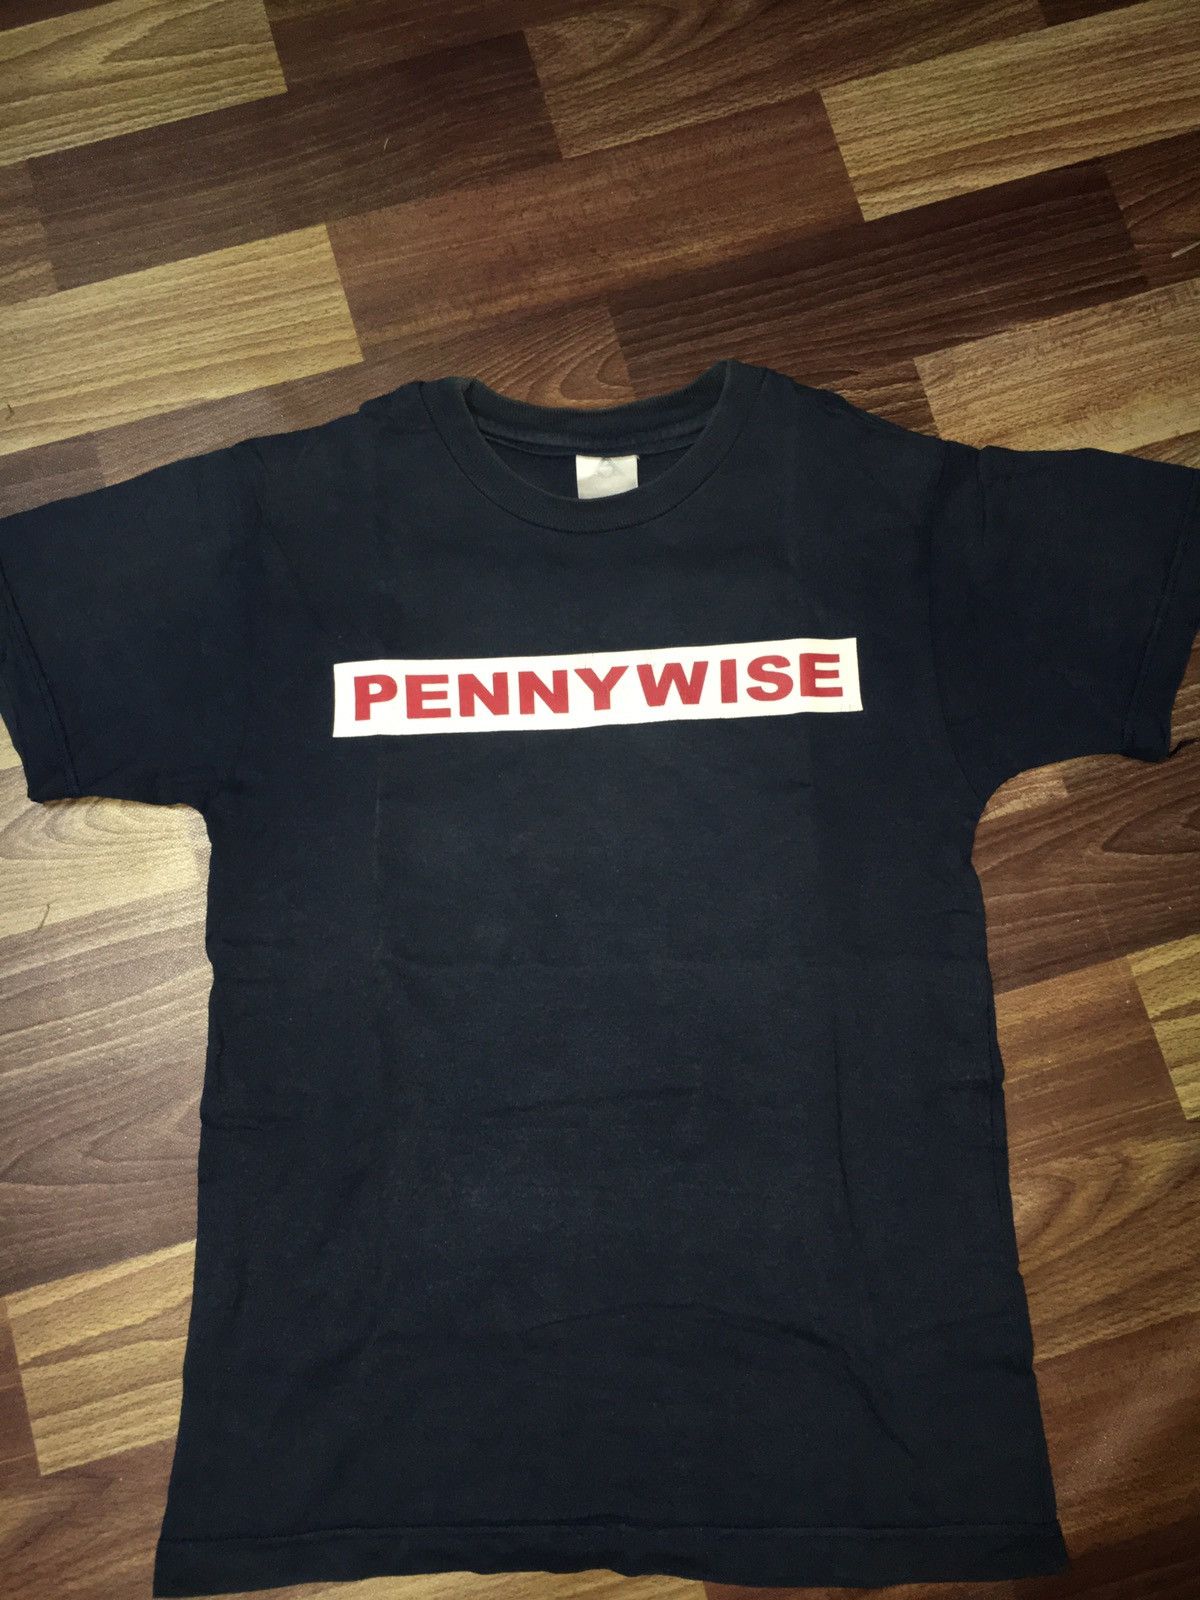 Band Tees Vintage Pennywise Band Tshirt | Grailed